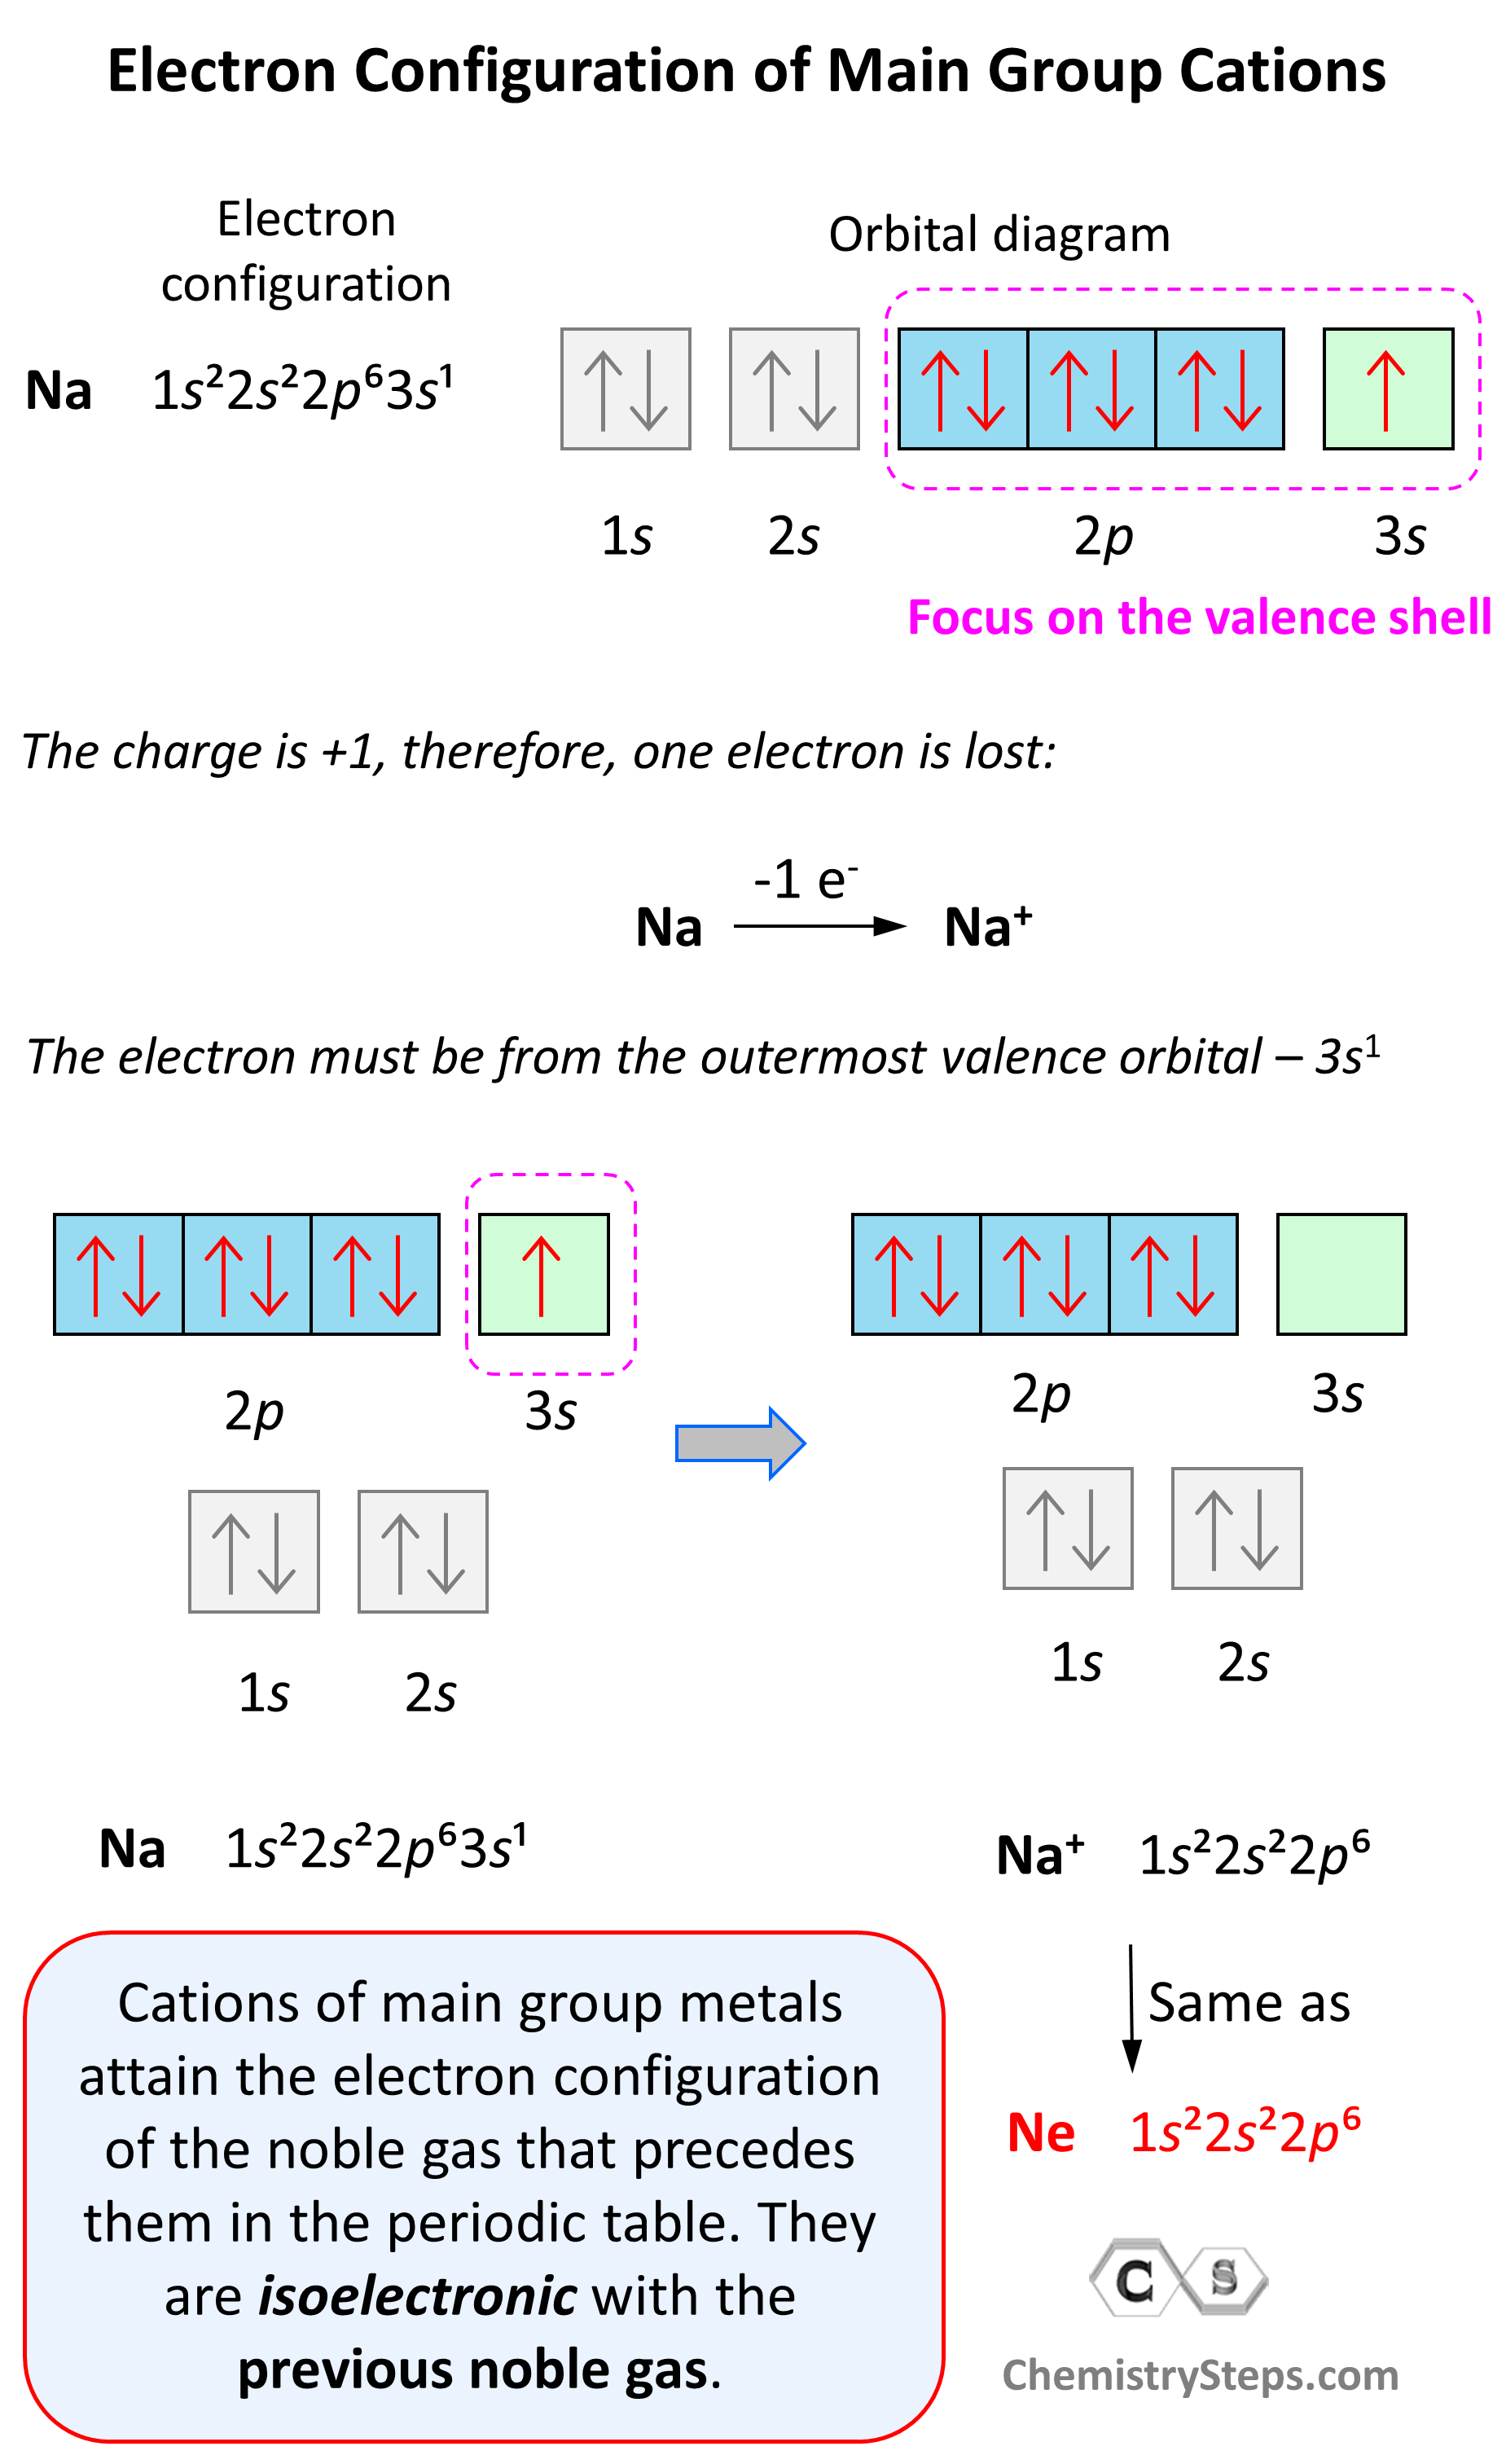 Electron Configuration of Main Group Cations